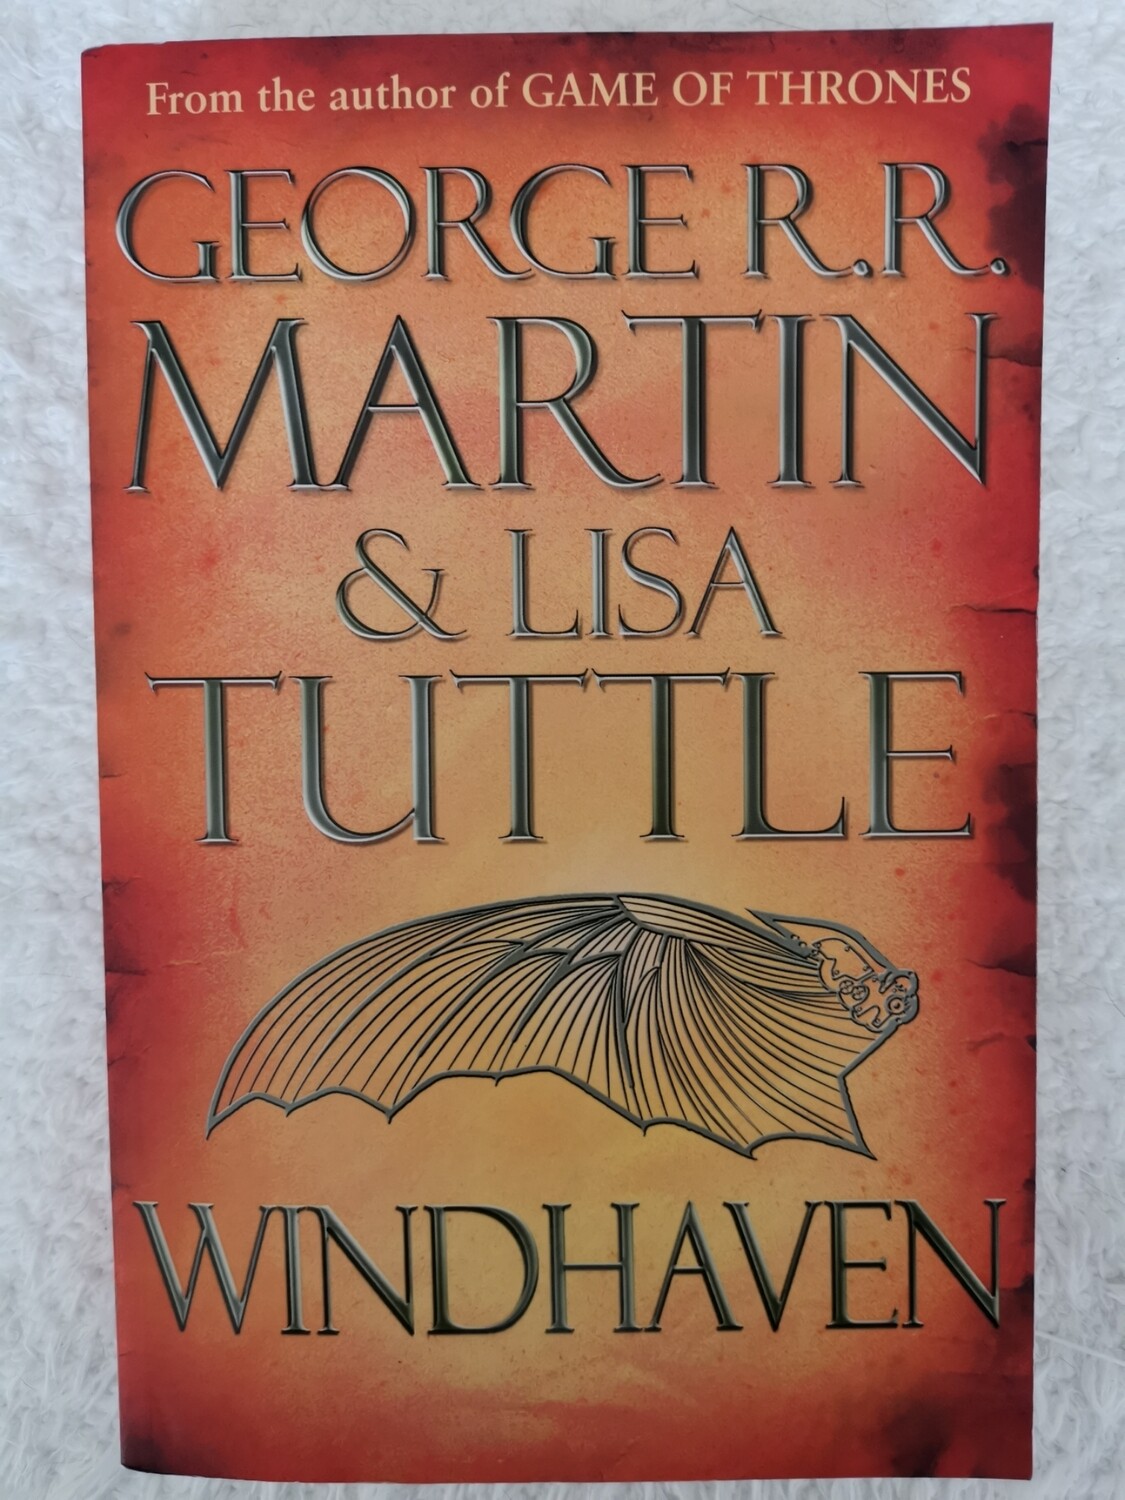 Windhaven, George R R Martin